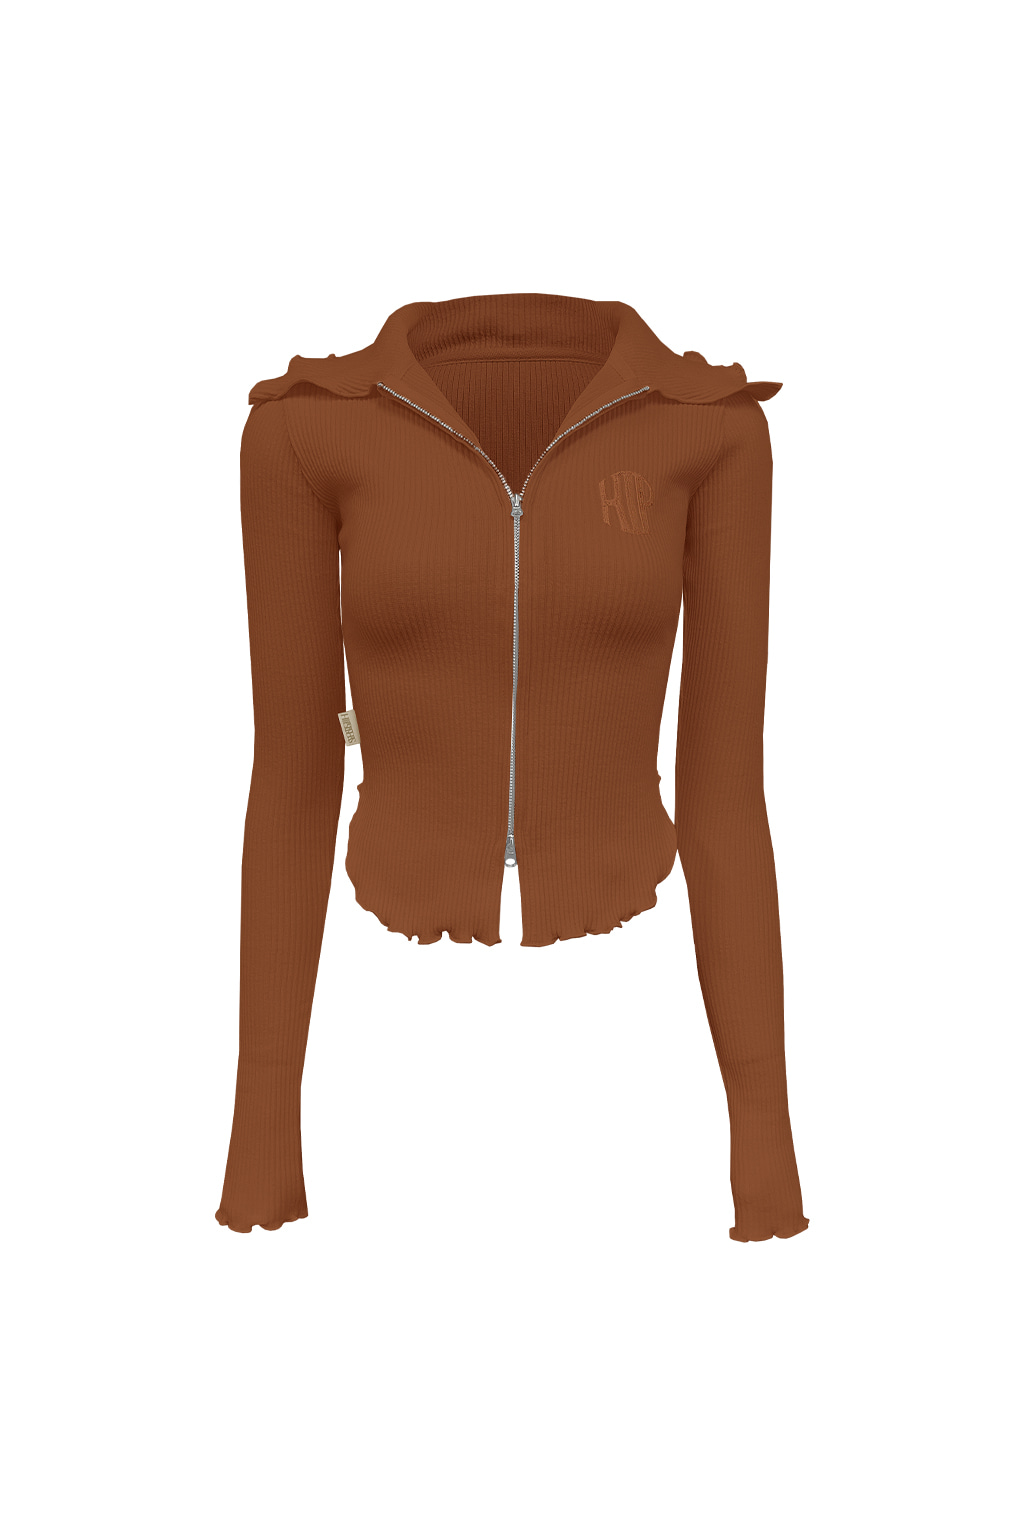 V-neck Tension Two-Way Glamour Zip-Up Rust Brown